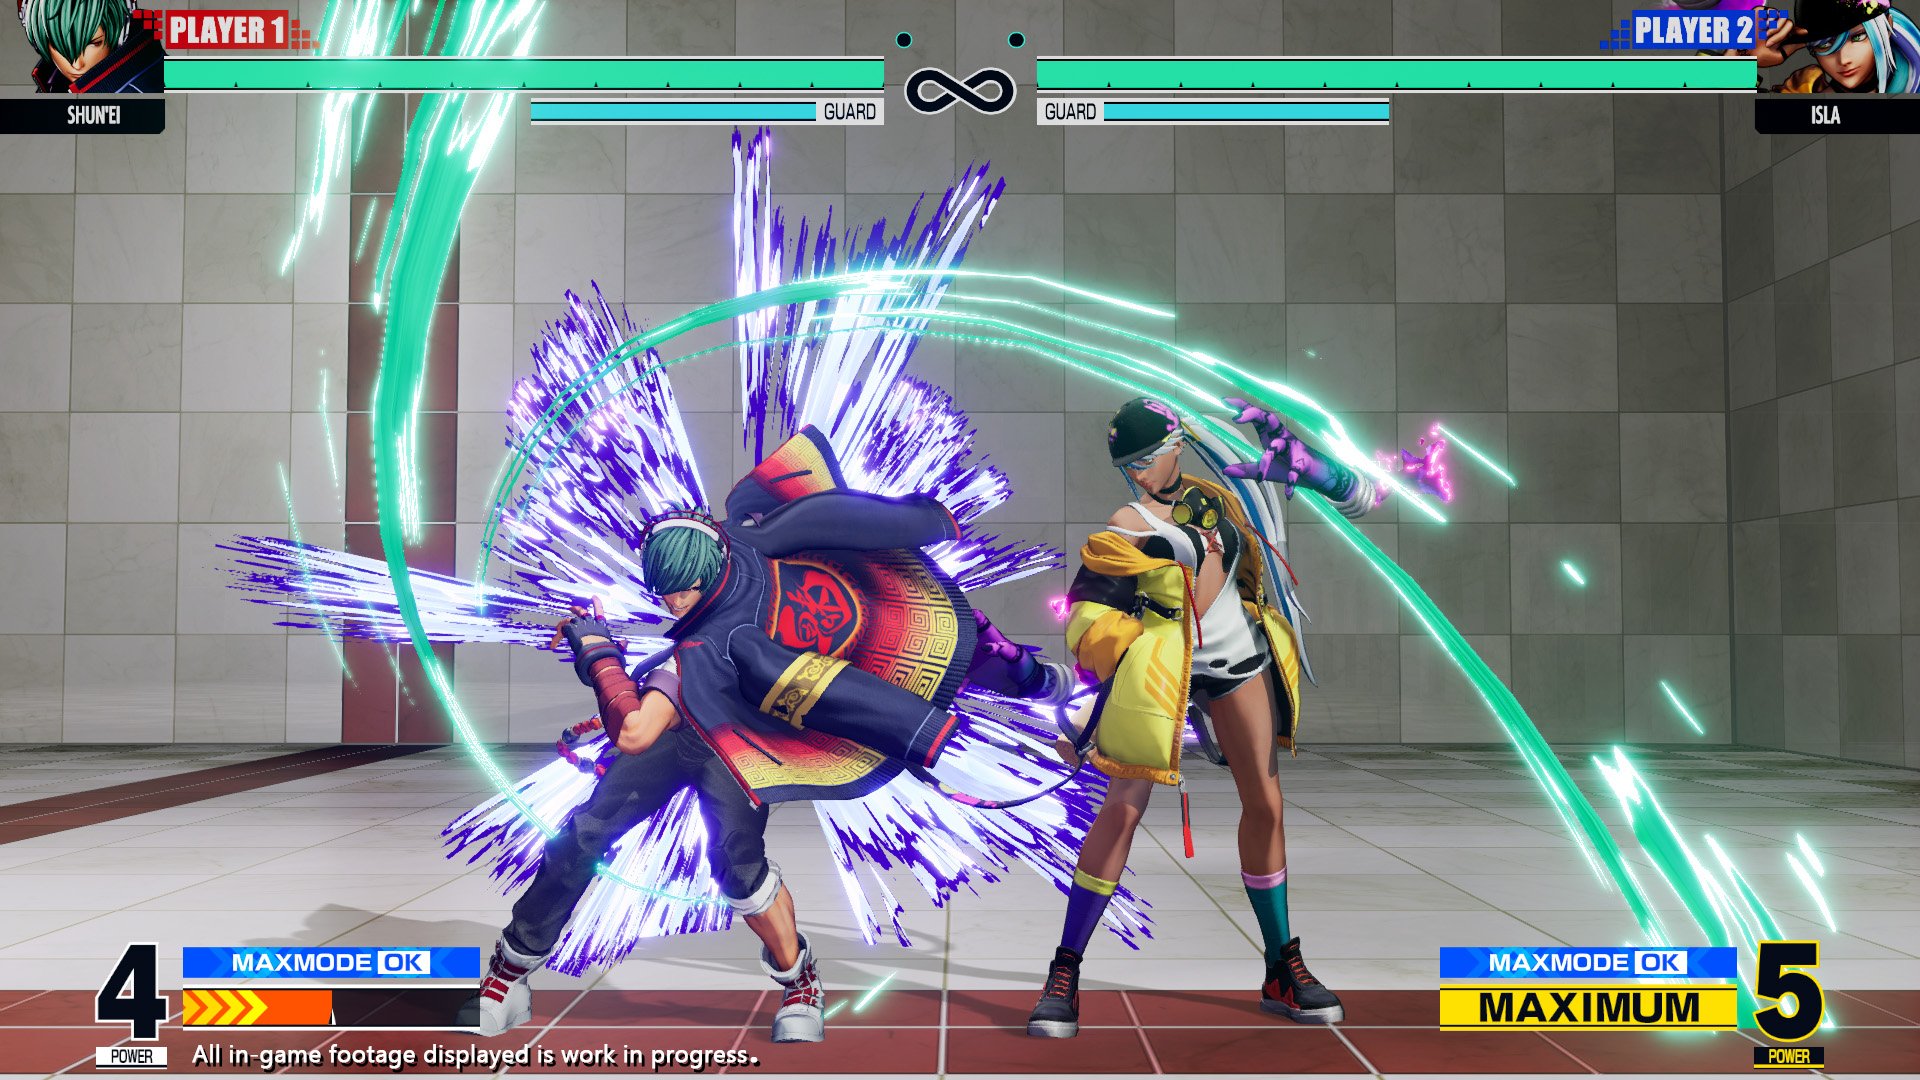 SNK's new 'Universe Project' aims to launch King of Fighters